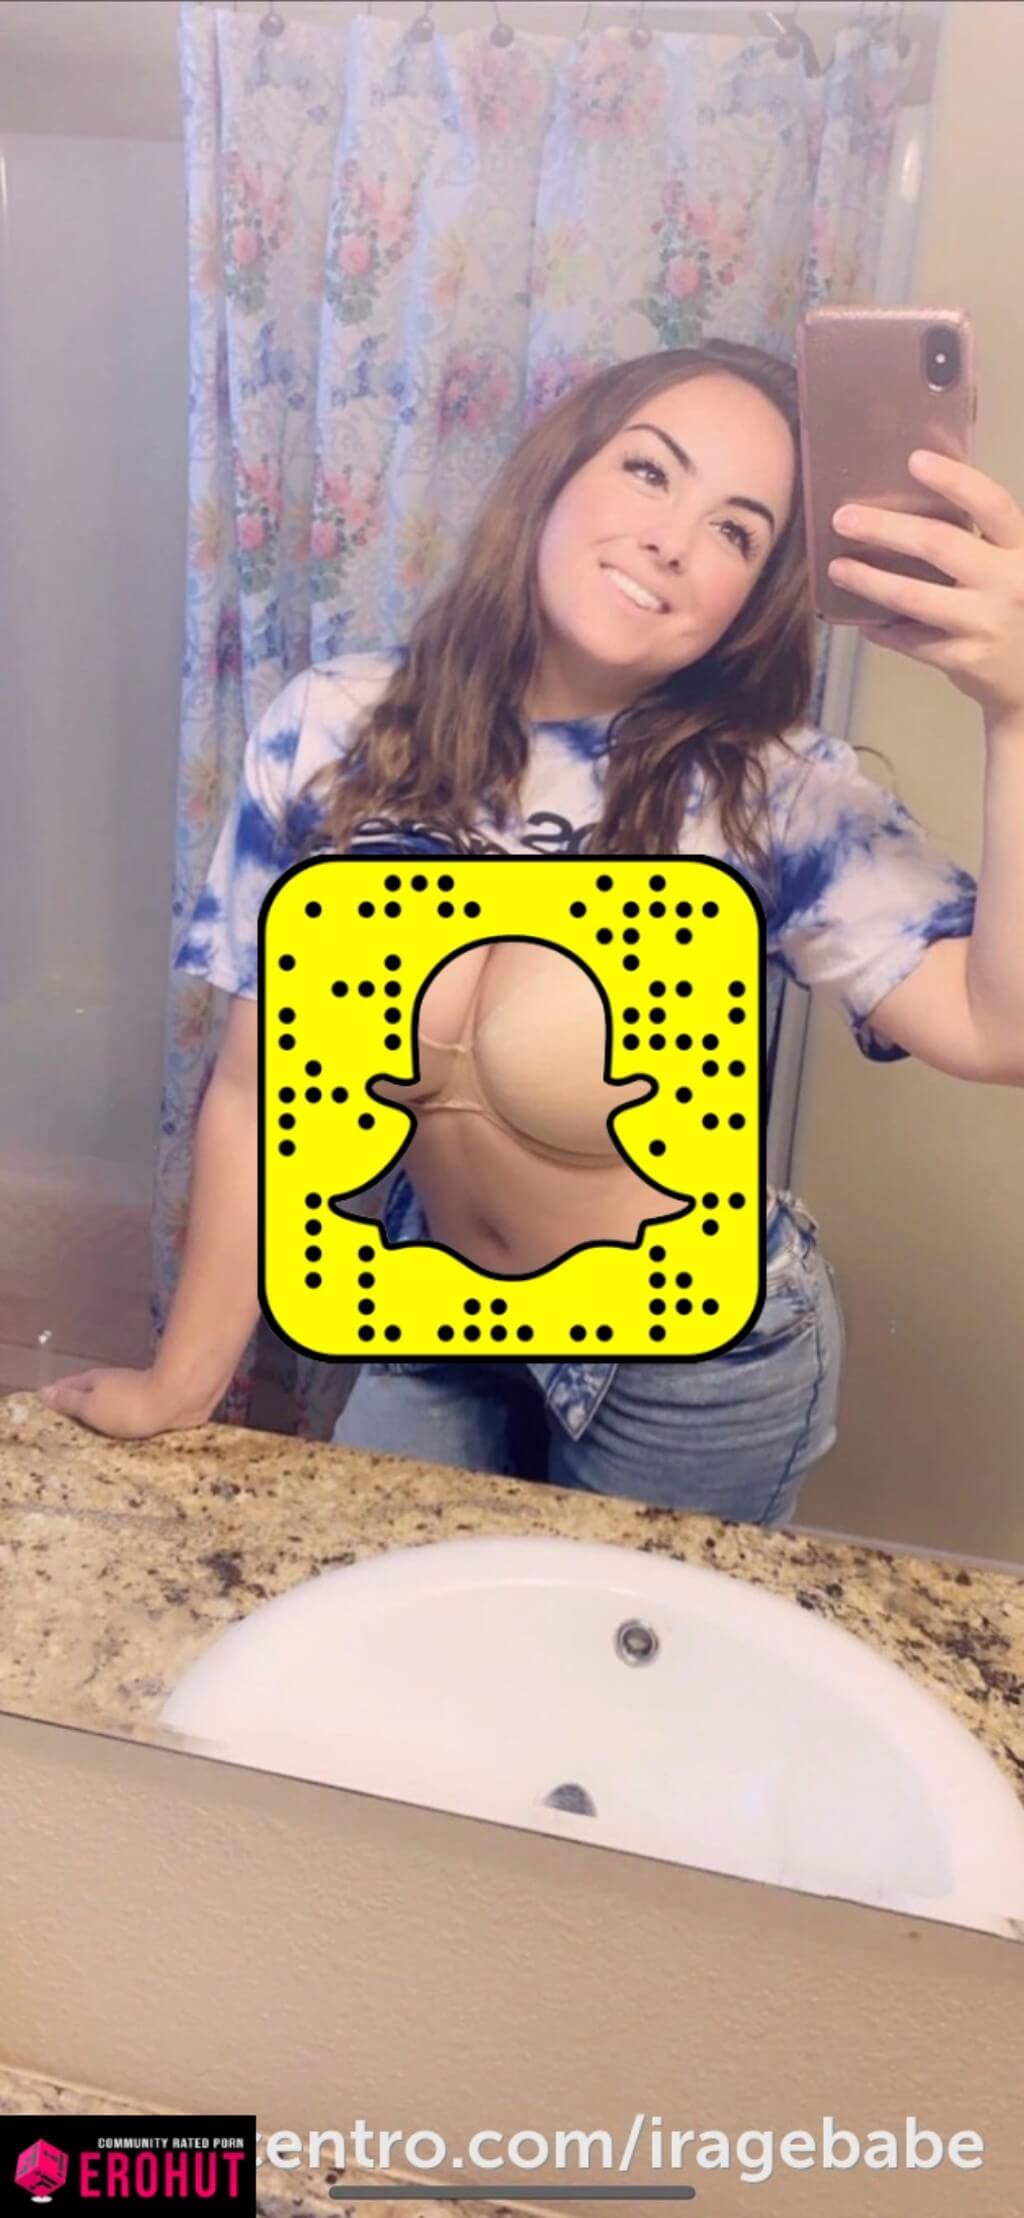 Sexiest snapchat videos